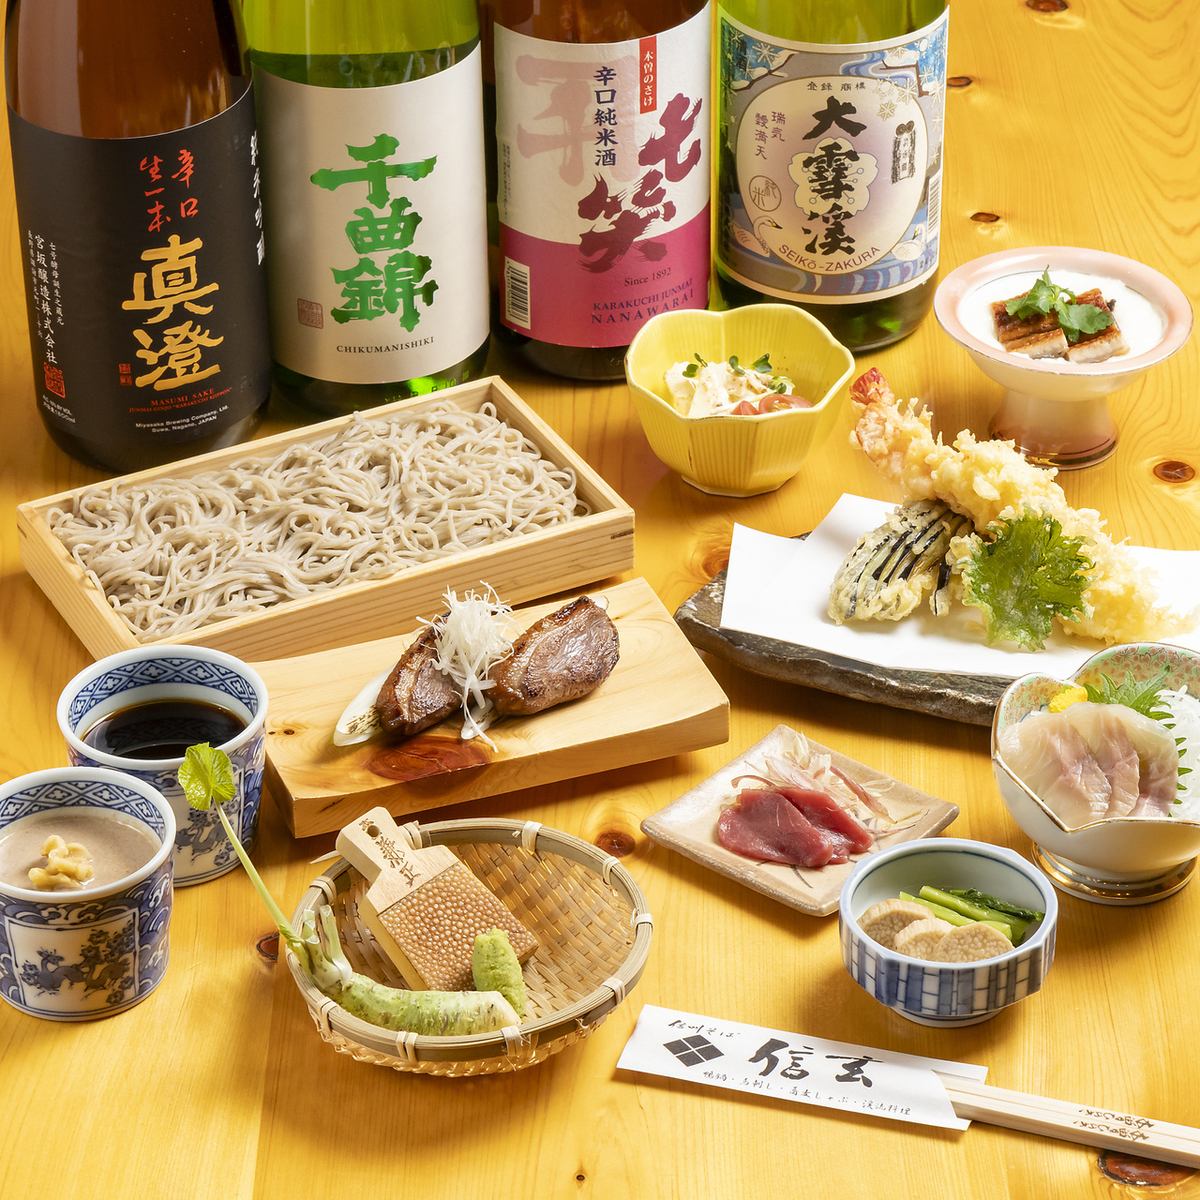 "Welcome to Shinshu" Soba noodles made from 100% buckwheat flour from Shinshu and the "delicious" tastes of Nagano are gathered in Fujisawa.